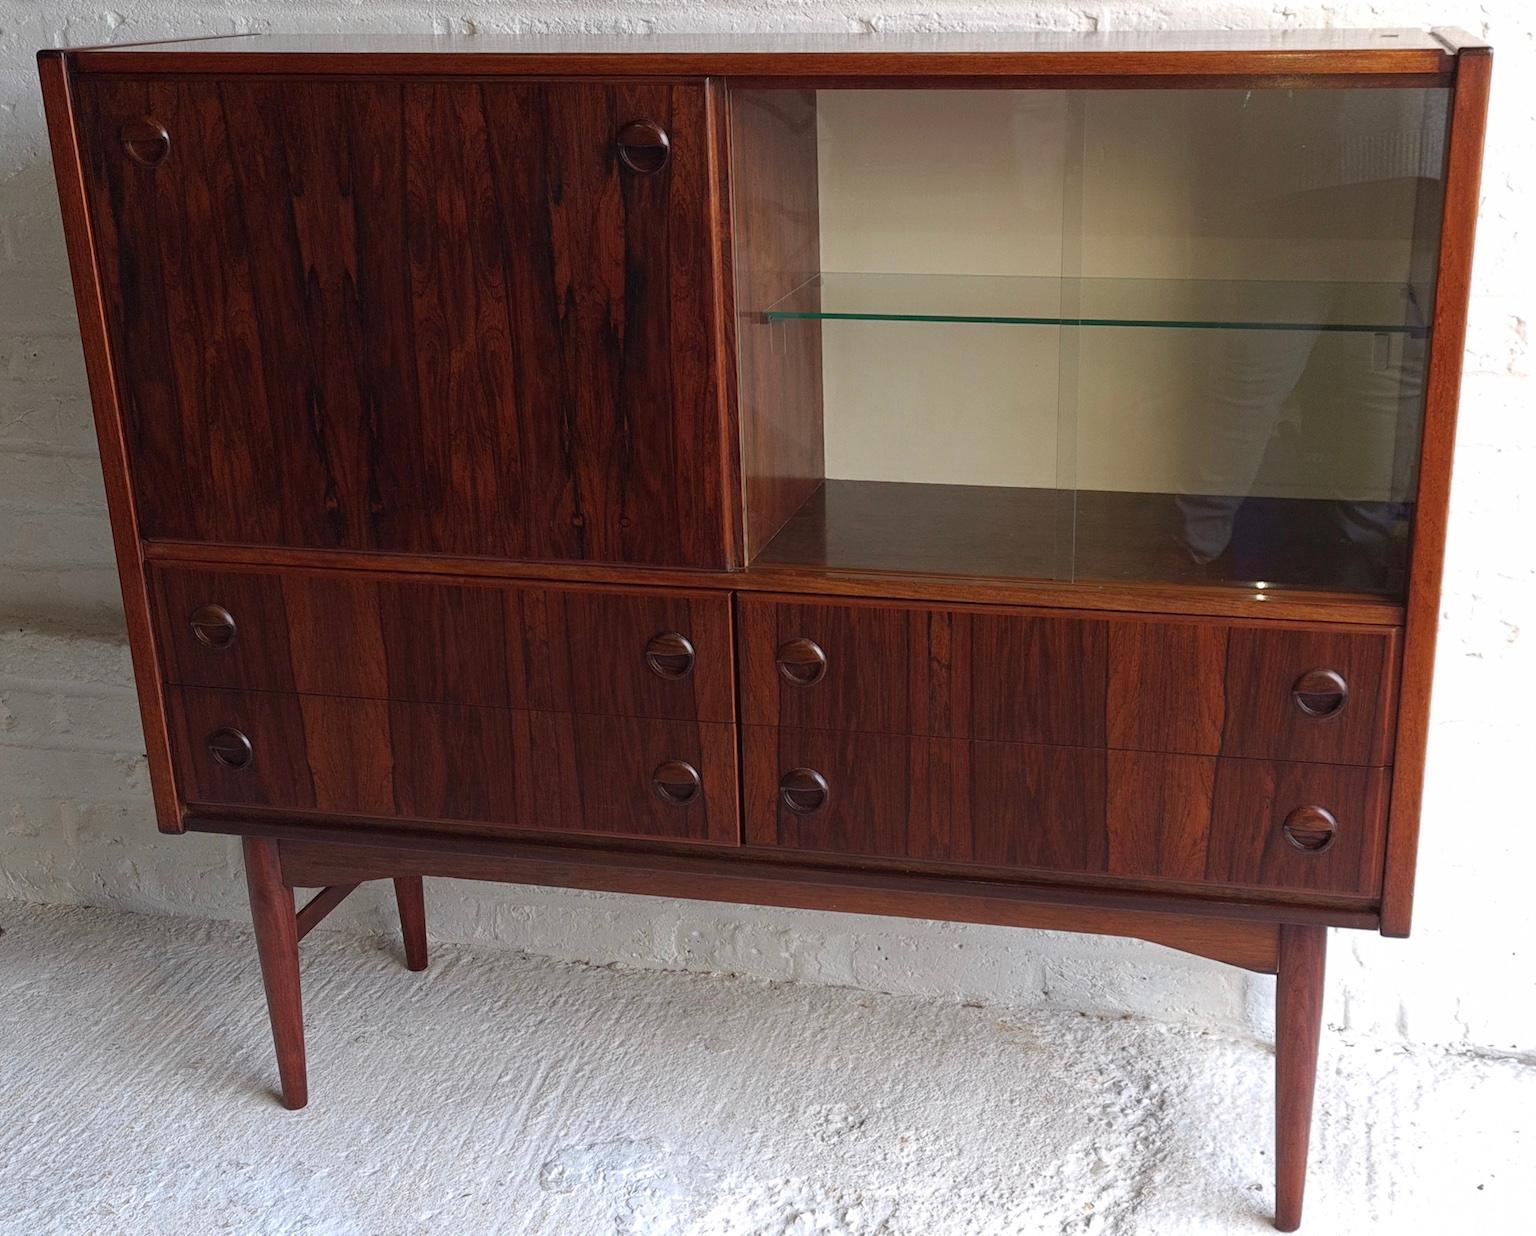 Midcentury Danish rosewood highboard / sideboard / drinks cabinet, circa 1960s

Top half consists of a drop down drinks cabinet, and cupboard with glass shelf and two sliding glass doors for glasses. Below, this is 4 x good sized drawers, all